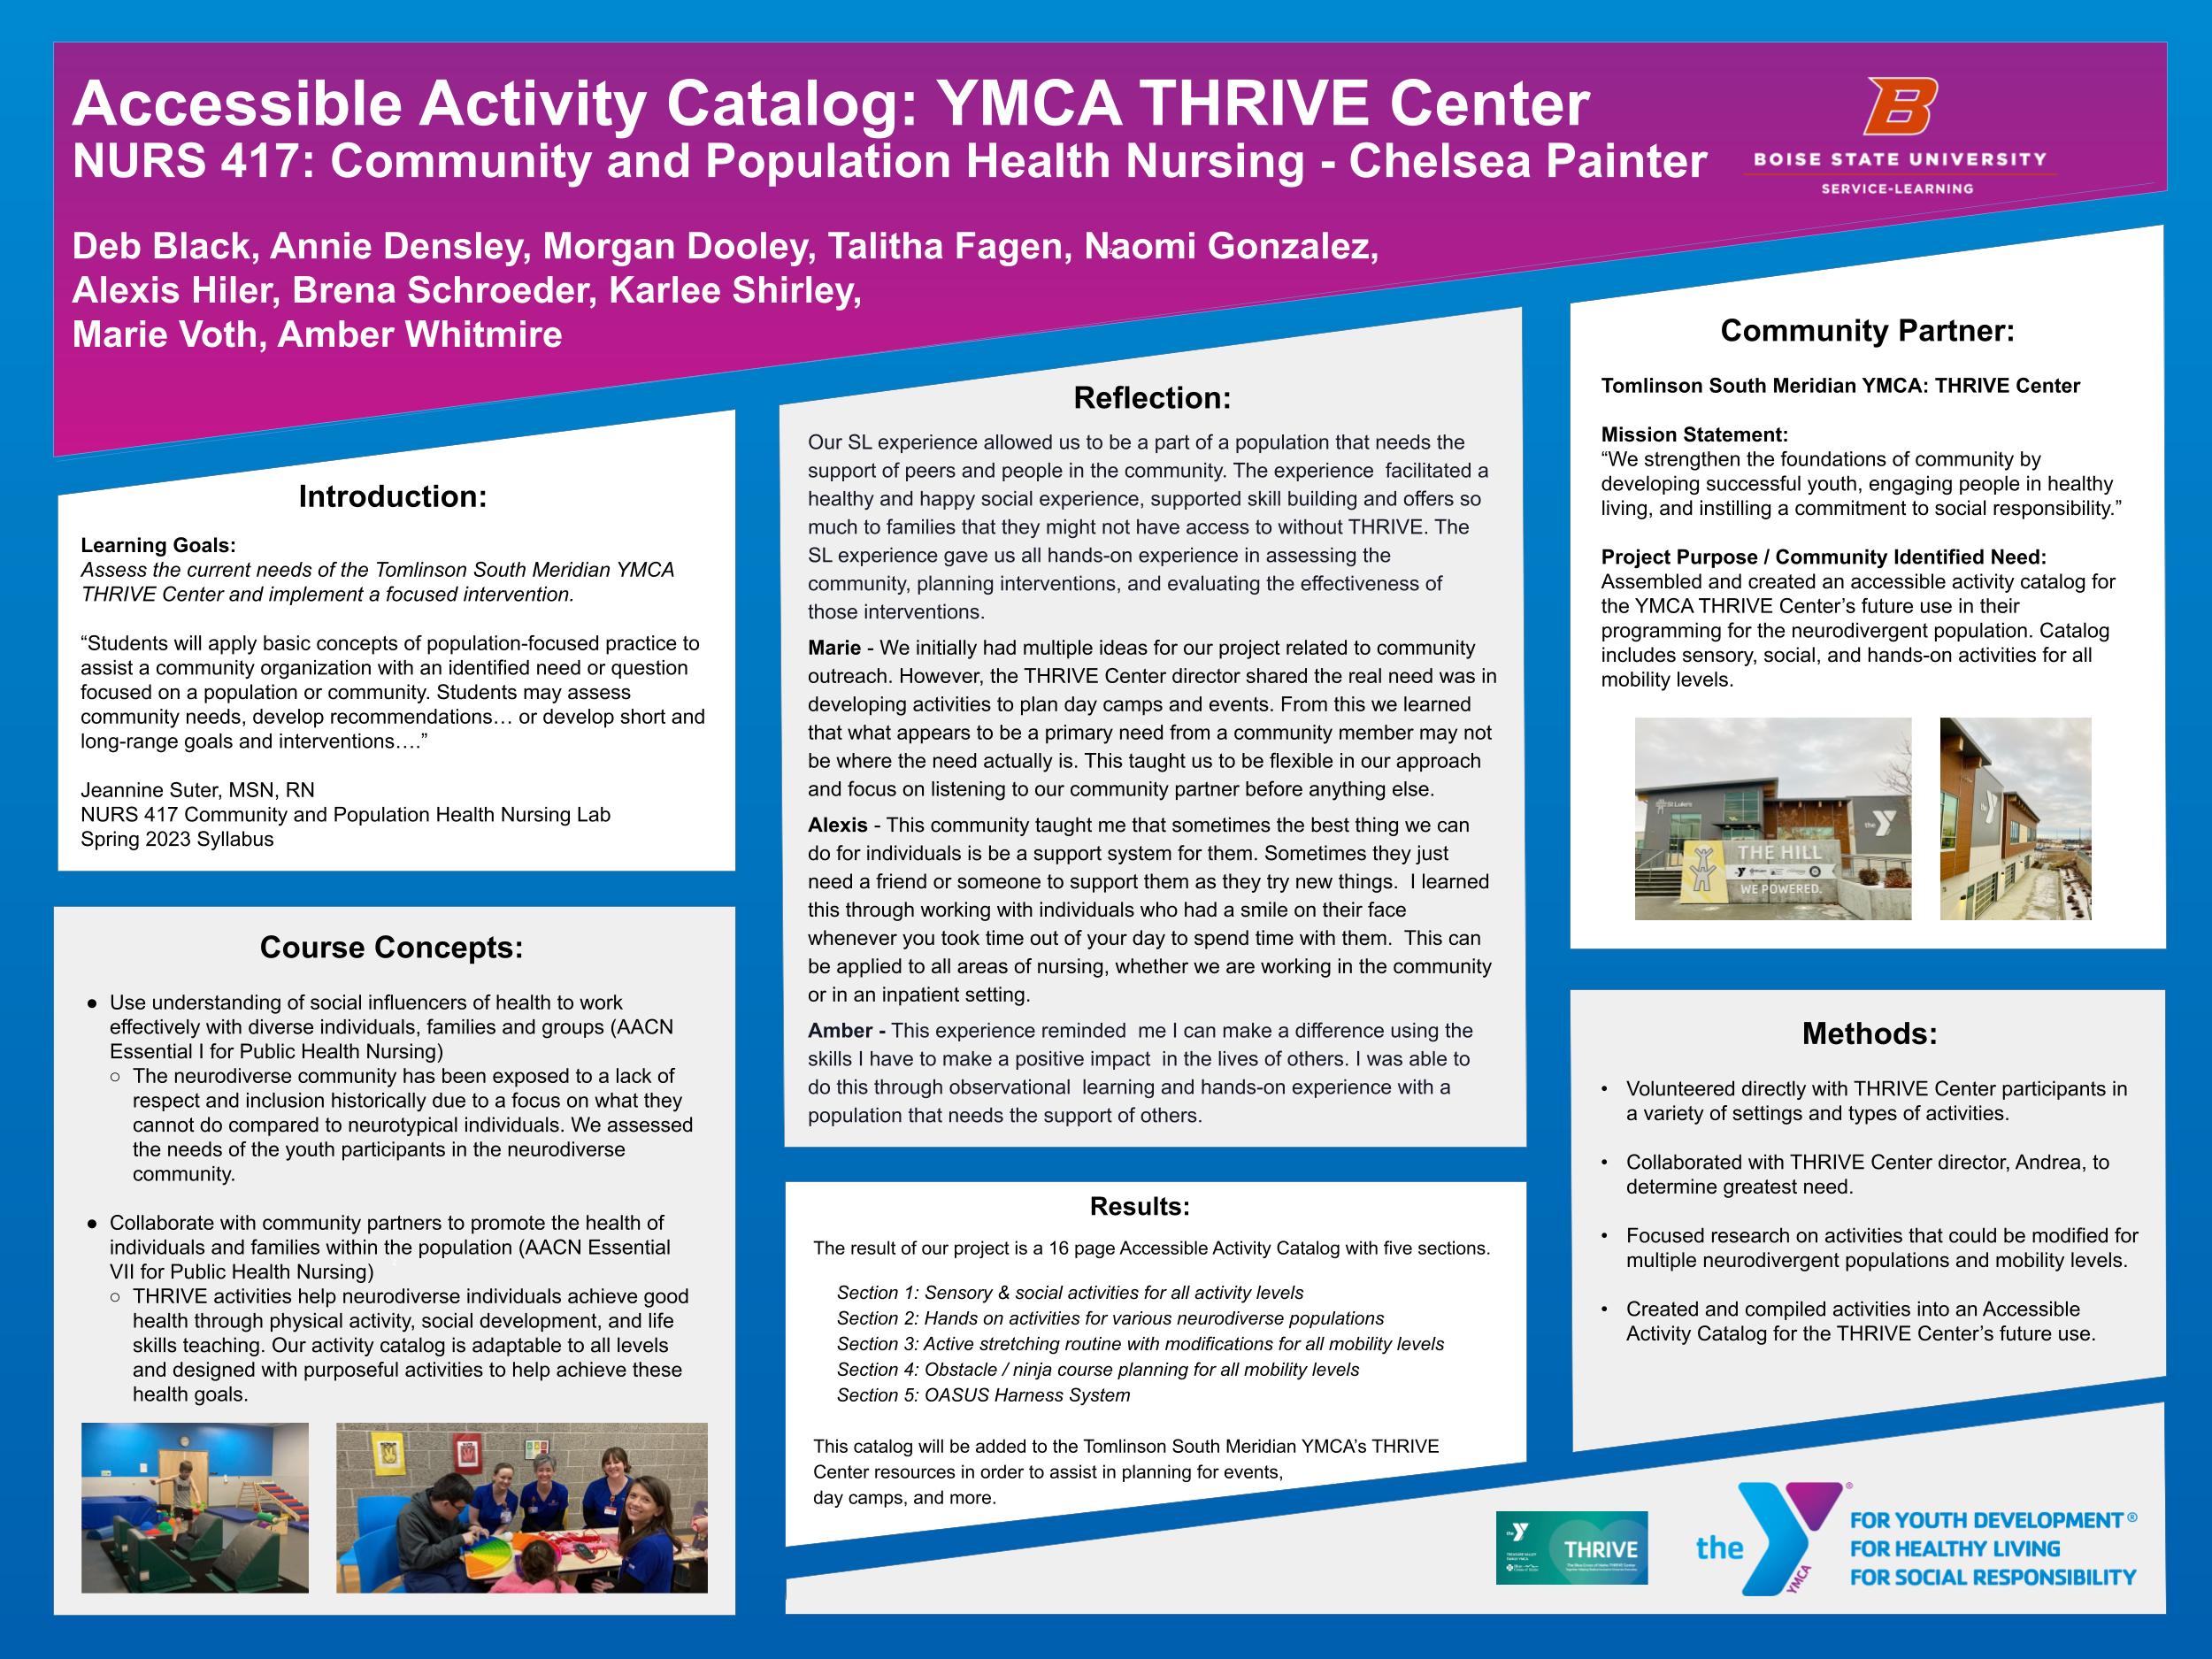 Accessible Activity Poster - full description on page